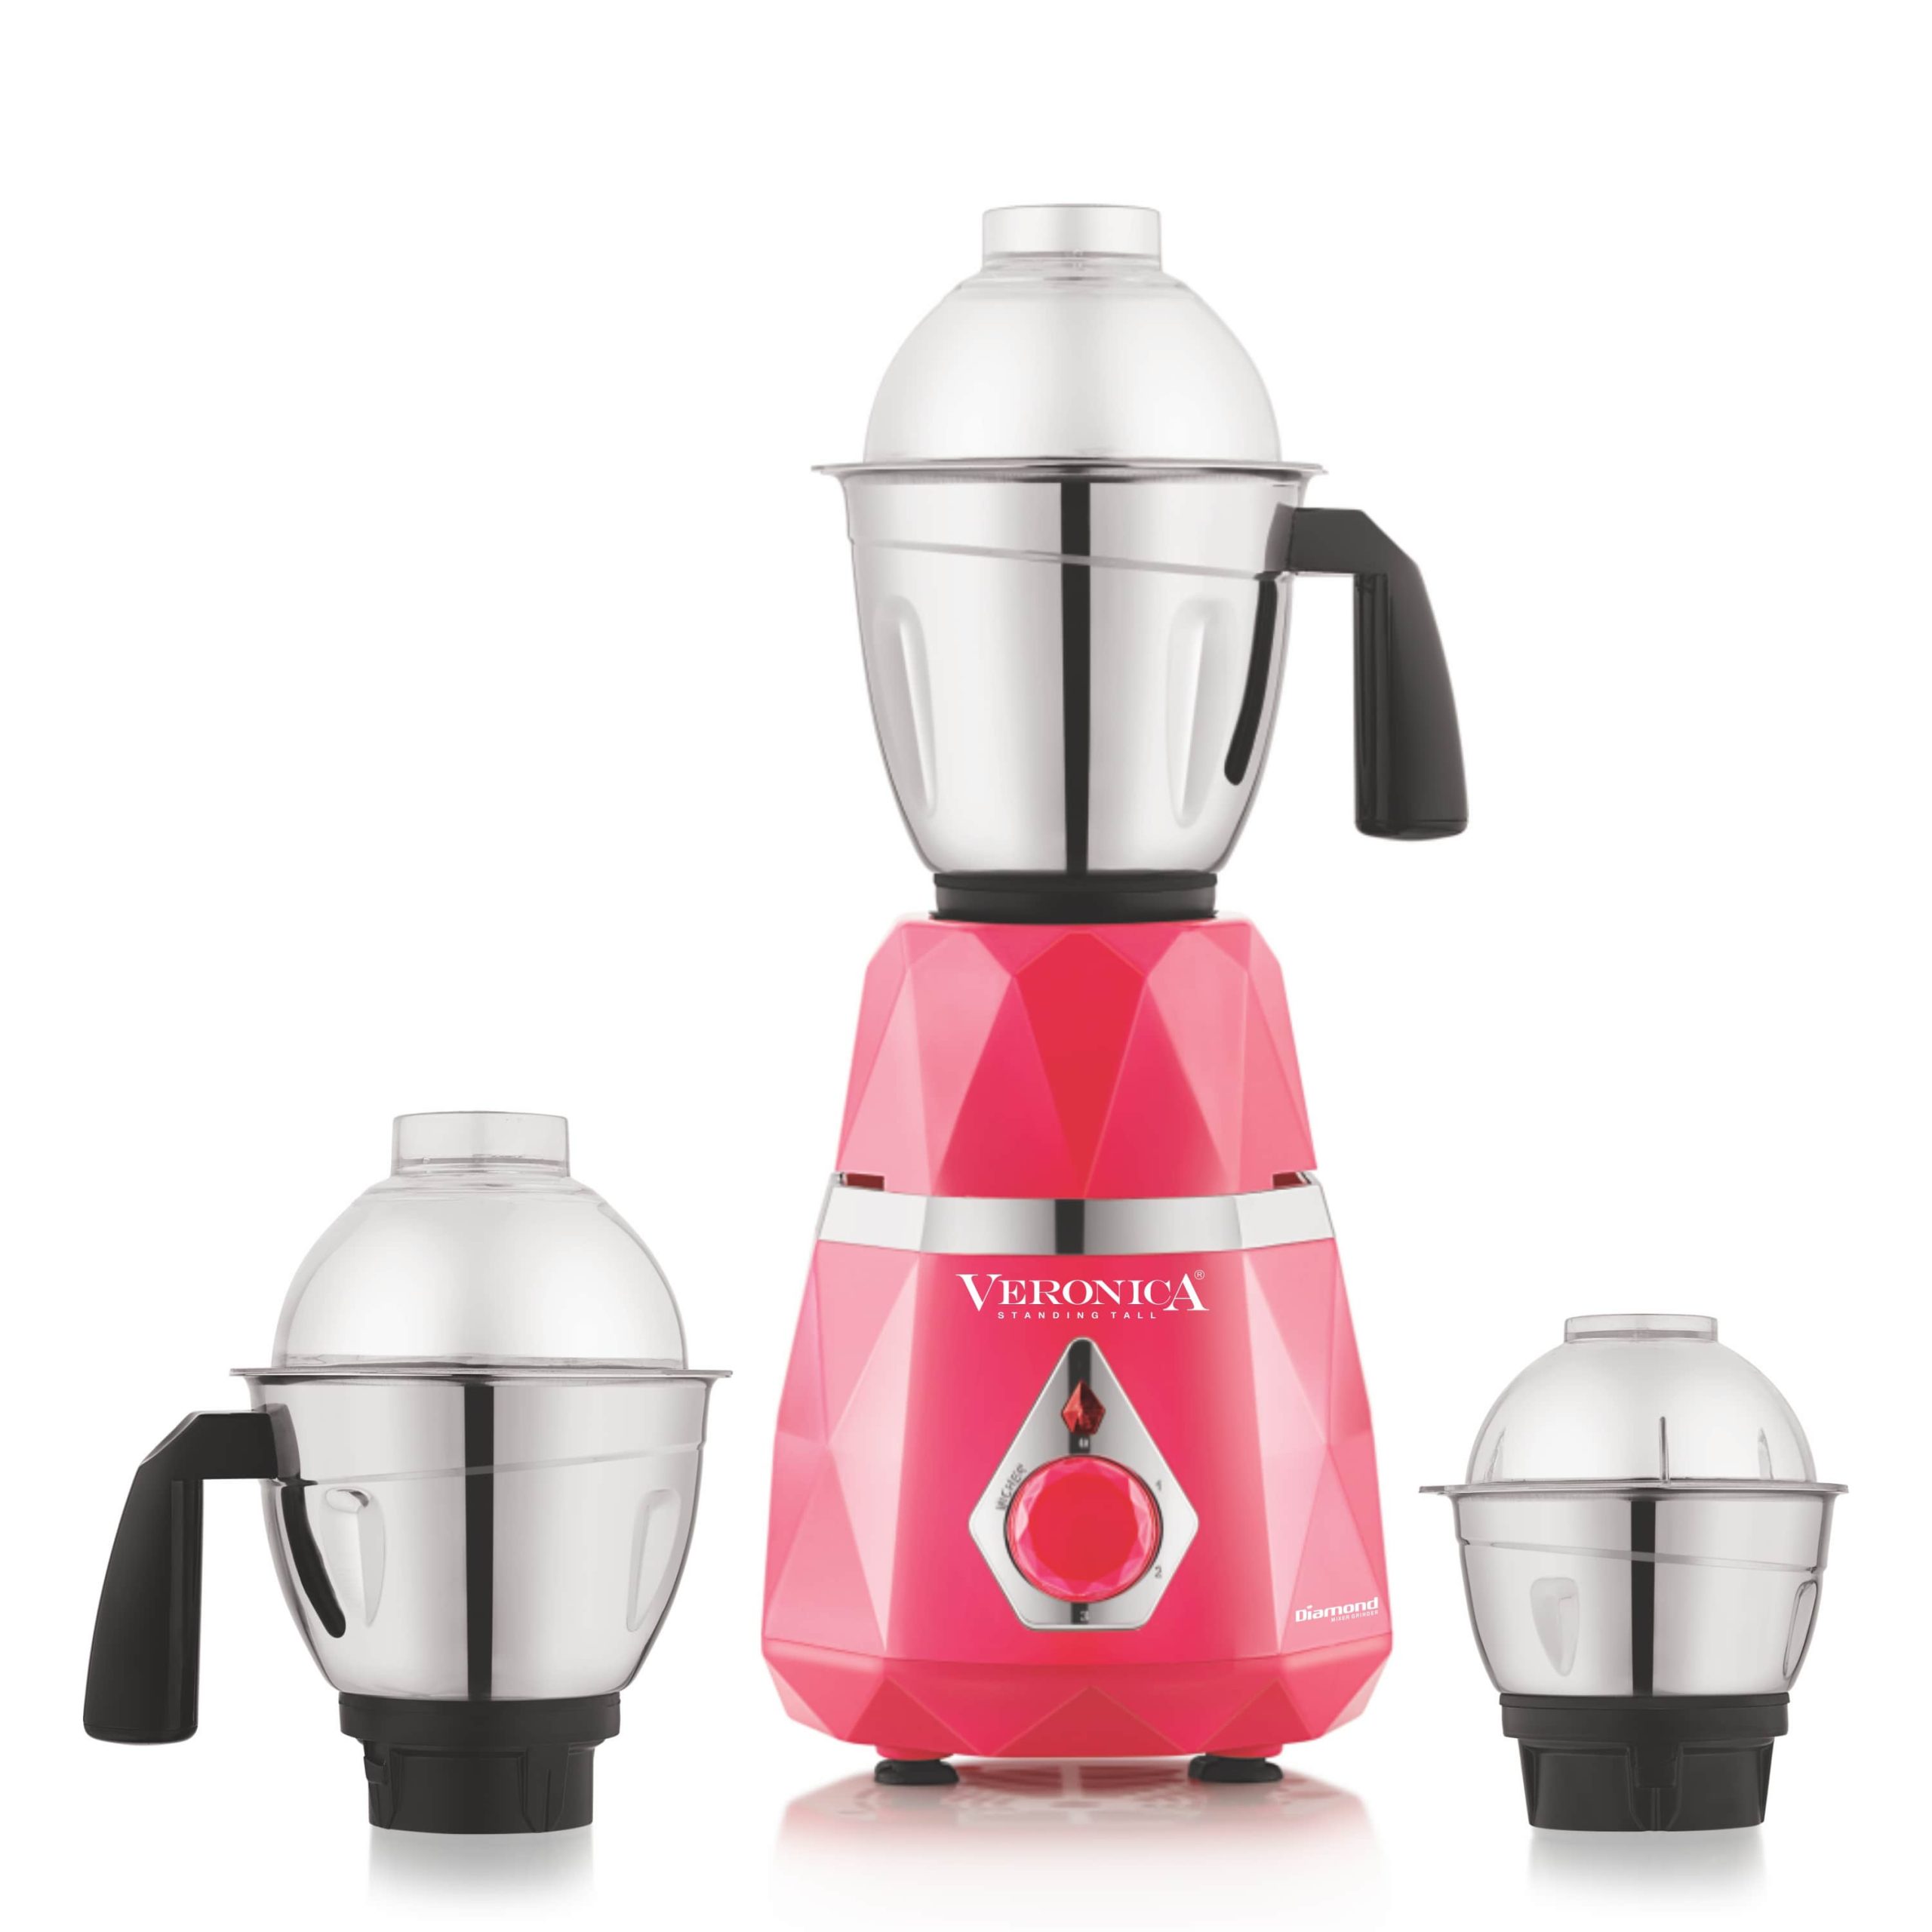 Veronica Diamond Mixer Grinder 1HP- with 3 Stainless Steel Jars (For Dry Grinding, Wet Grinding, Chutneys, 2 years warranty, Pink